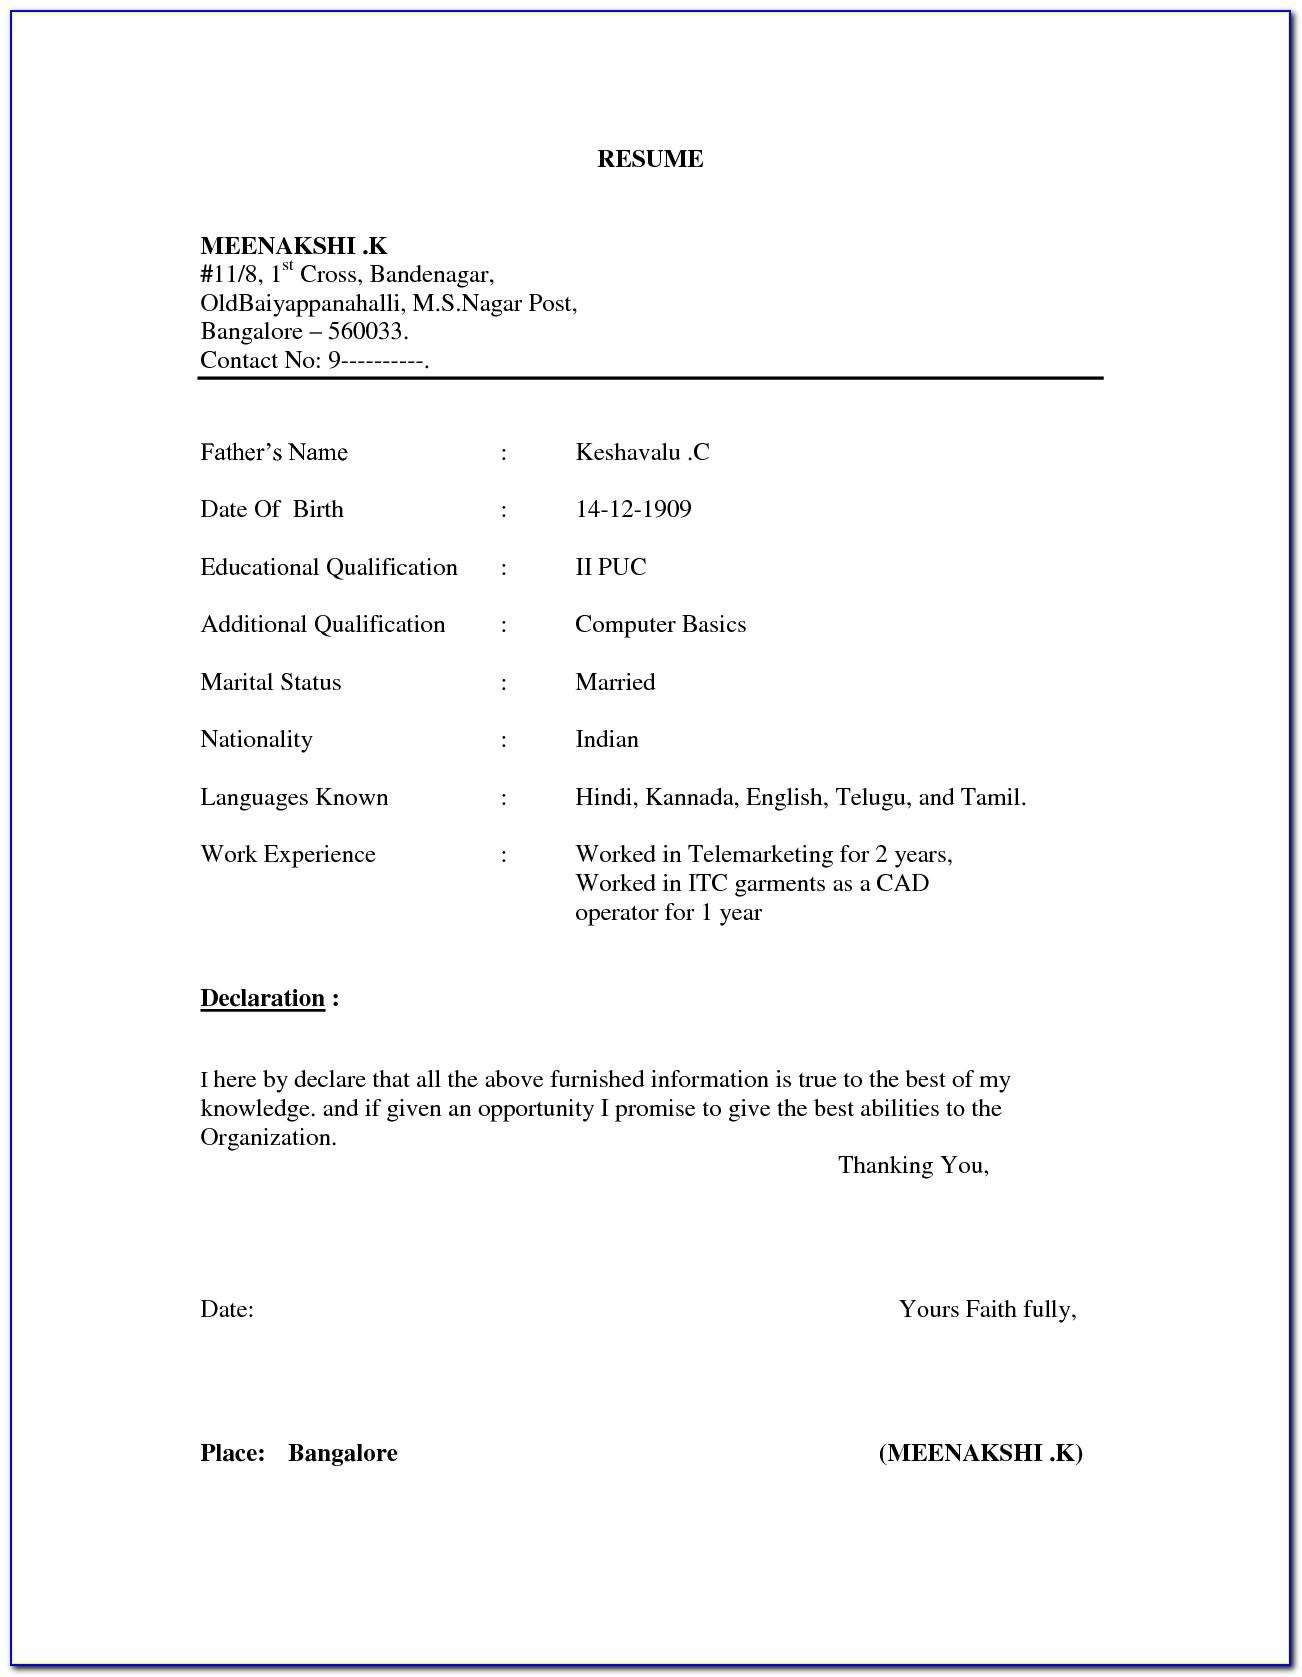 Resume Format For Civil Engineer Experienced Pdf Download